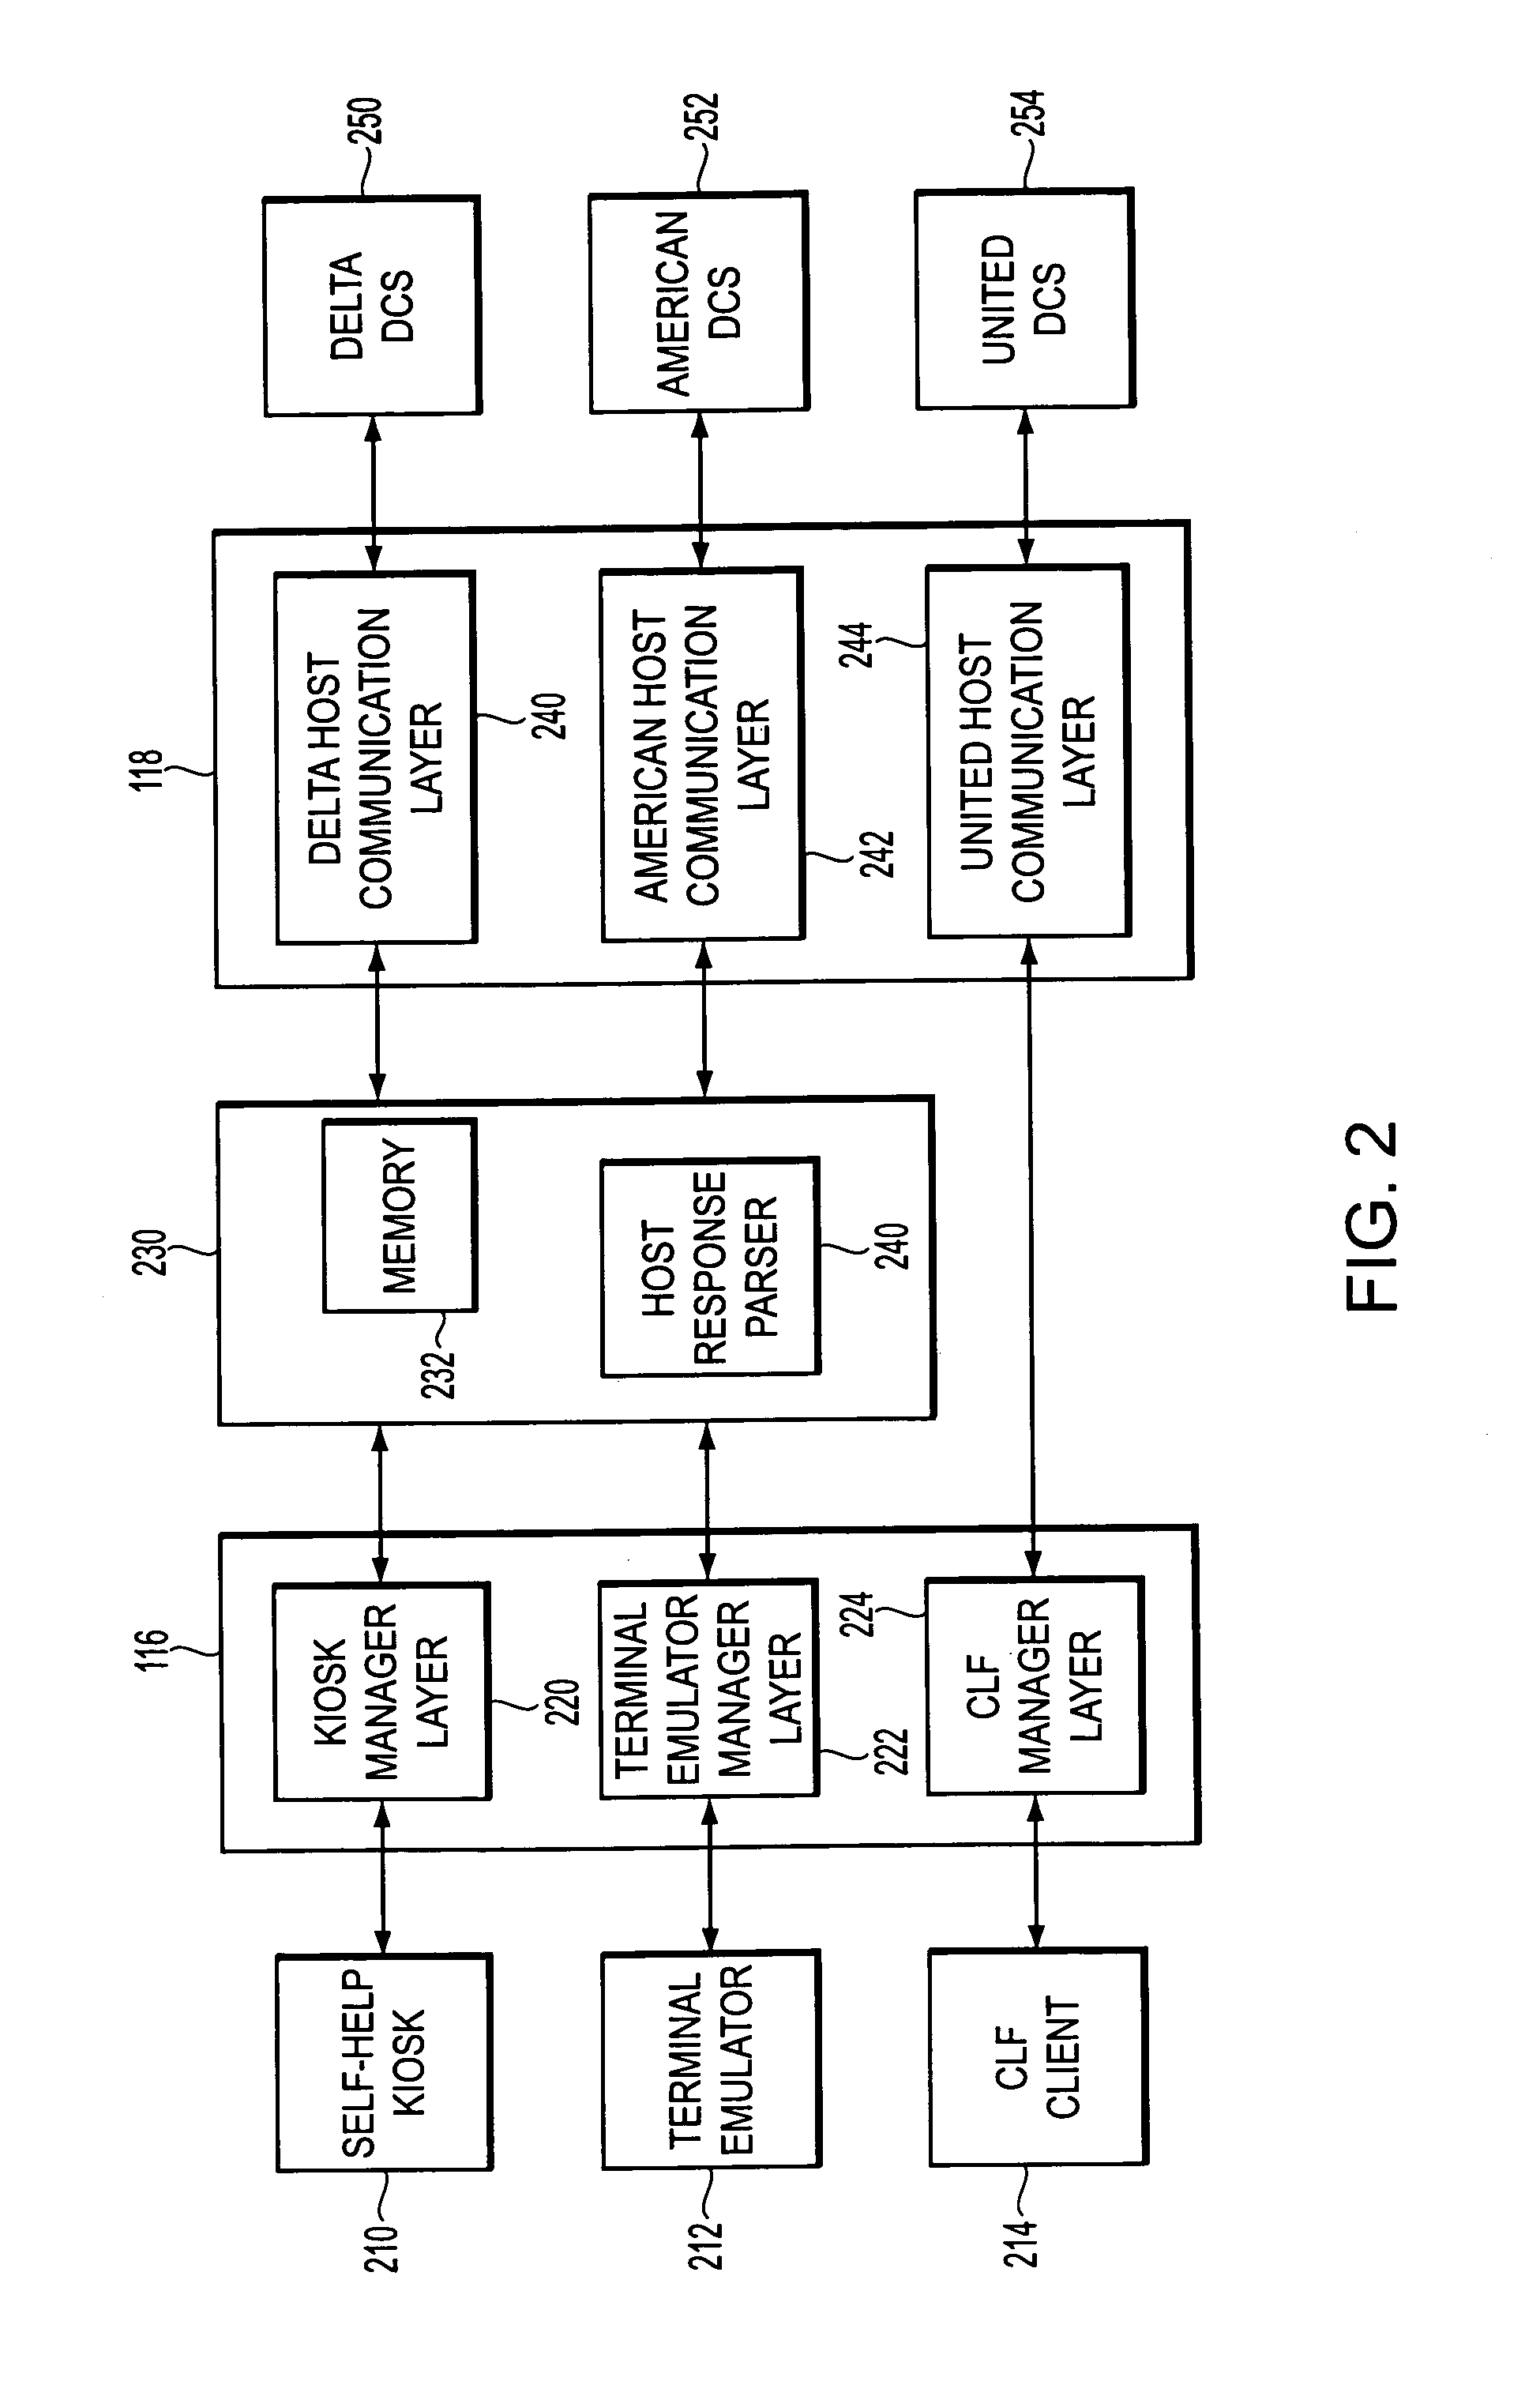 Systems and methods for host/client communications